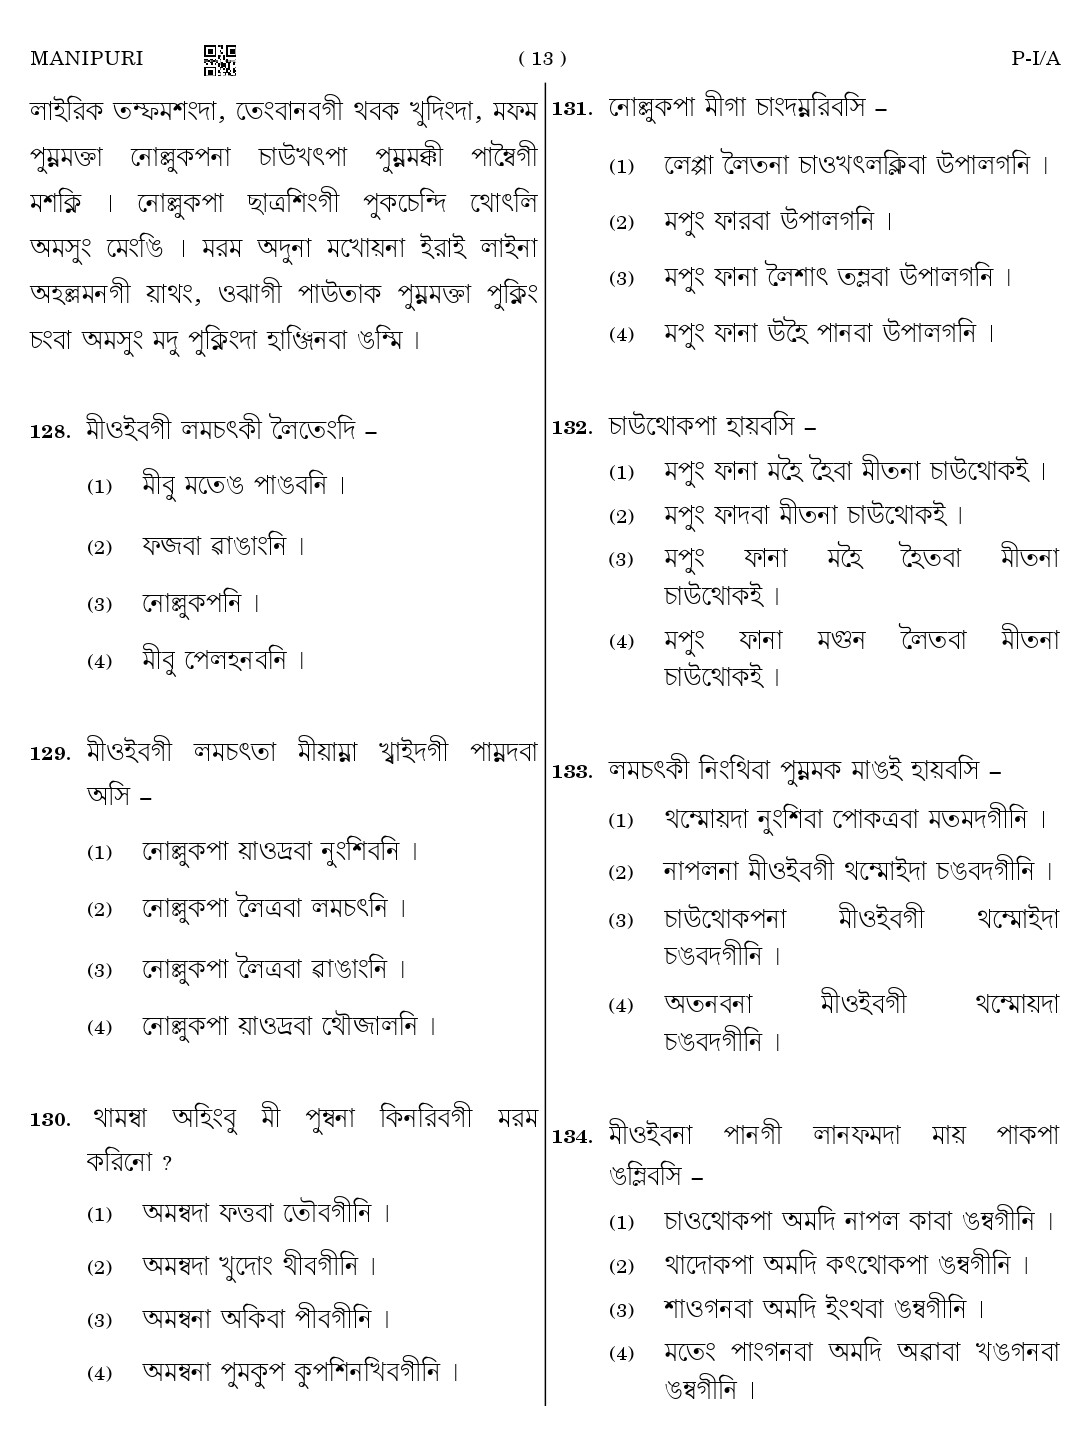 CTET August 2023 Manipuri Paper 1 Part IV and V 13